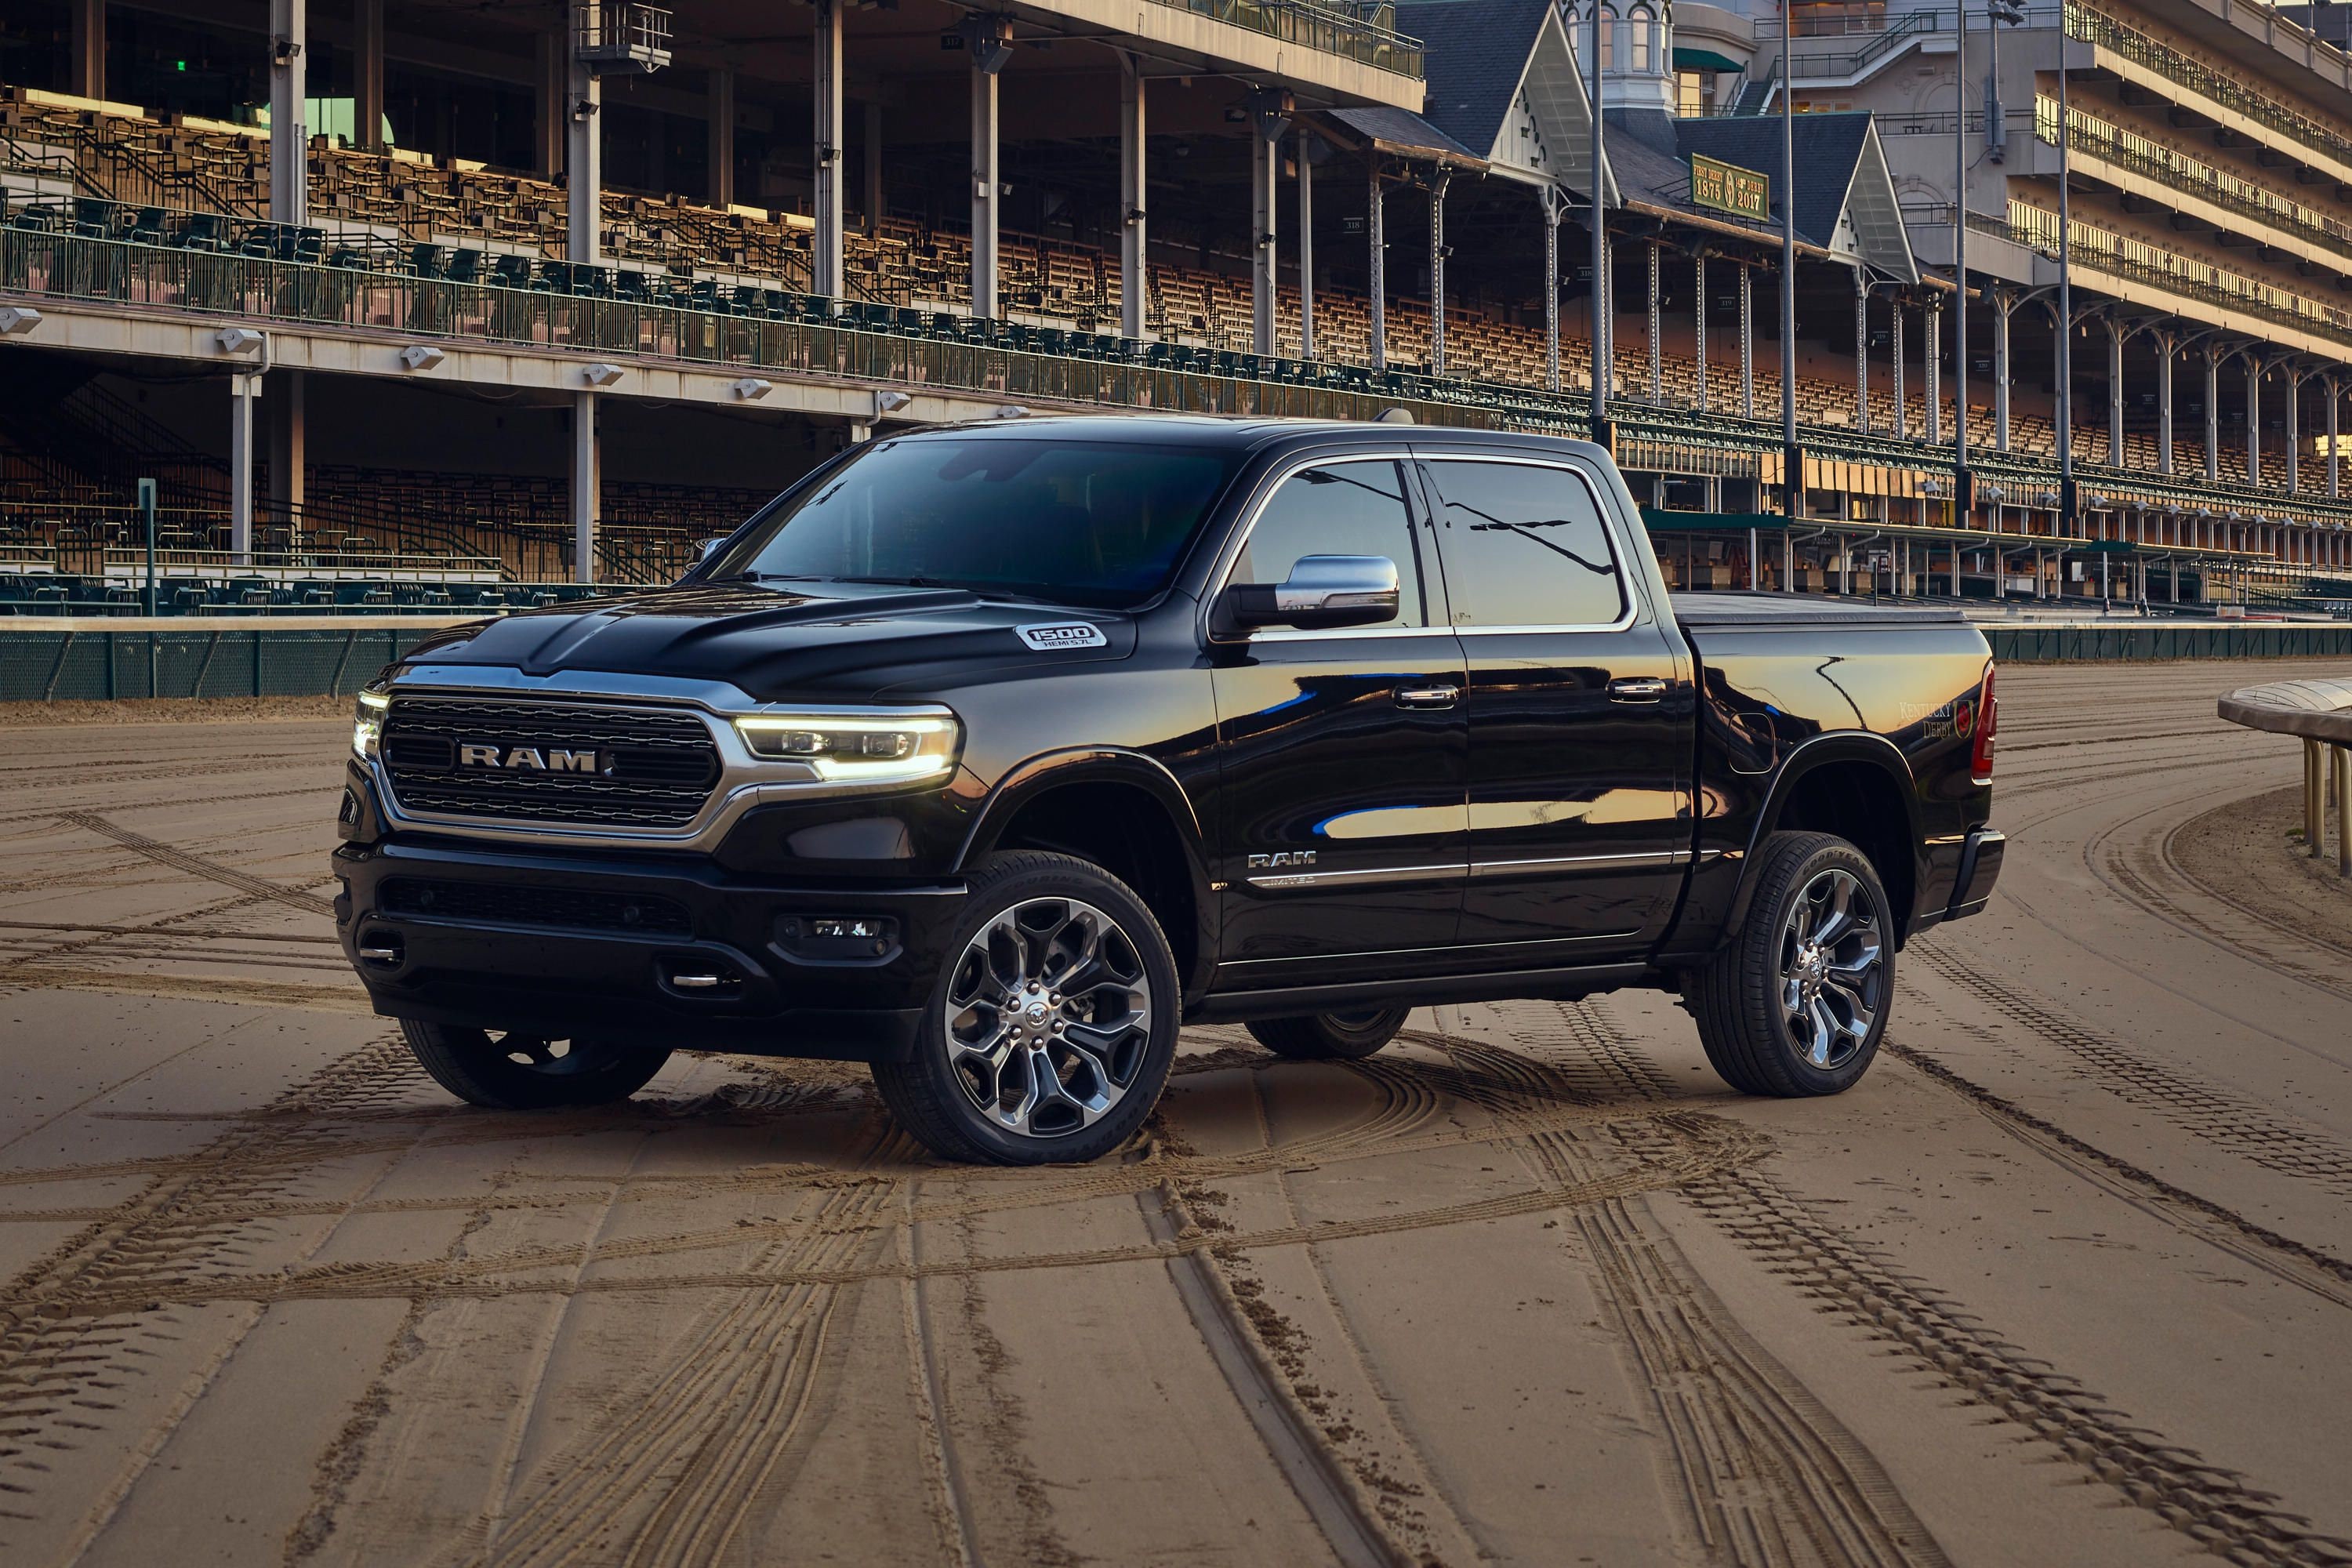 2019 Ram 1500 Pickup Black Poster | 24x36 Inches Ready To Ship